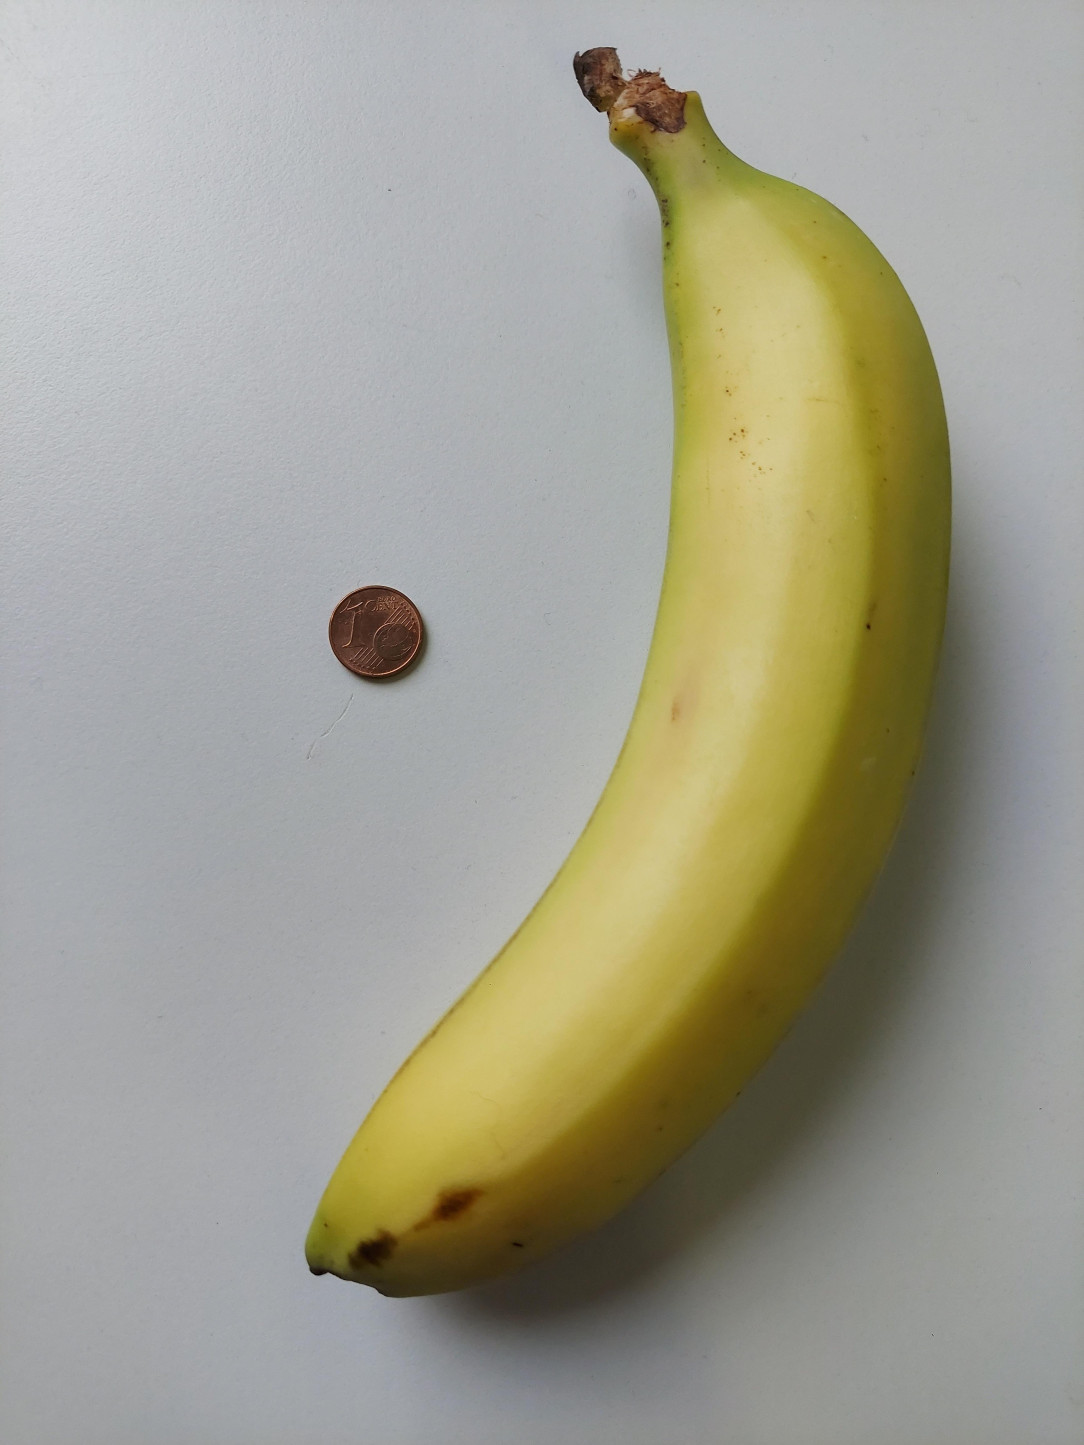 Why is the cent so small? Banana for scale